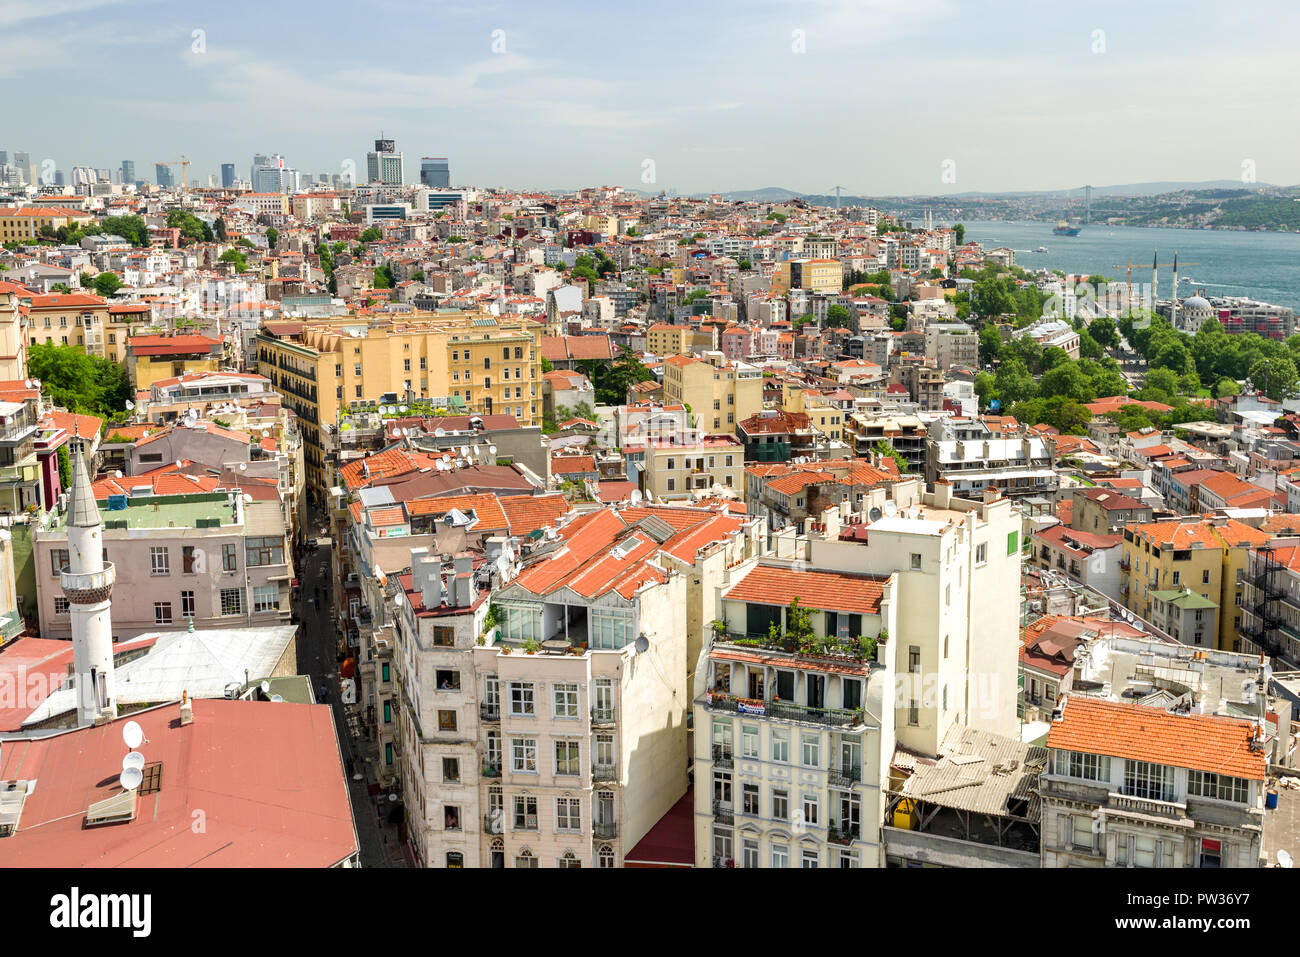 The view from Galata Tower across Beyoglu and the city on a sunny day, Istanbul, Turkey Stock Photo